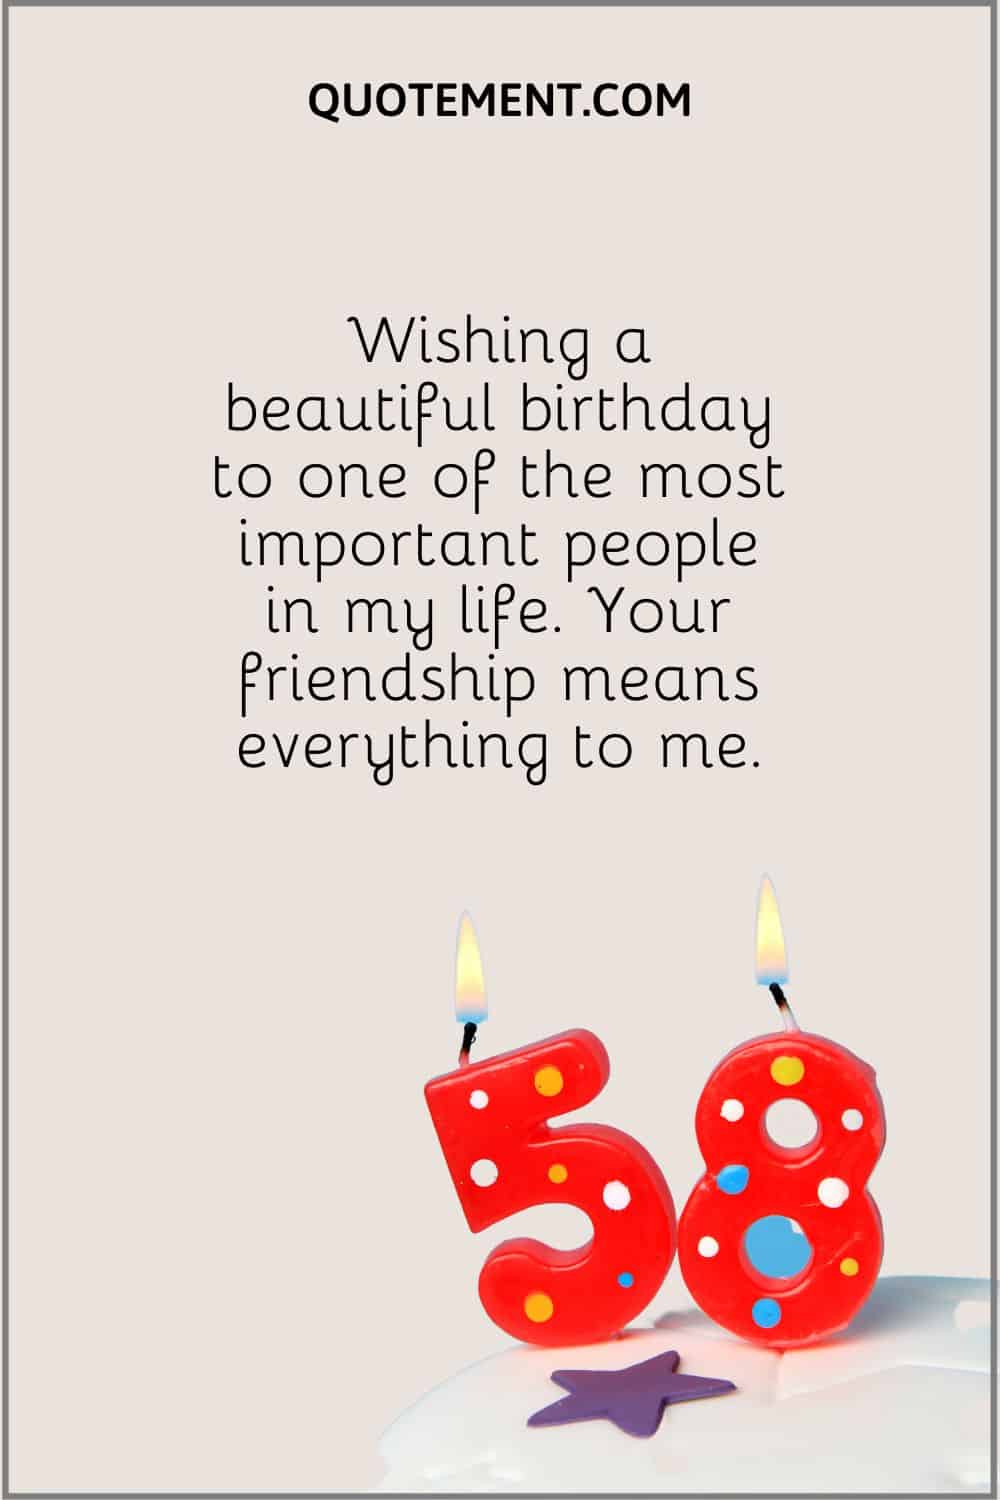 “Wishing a beautiful birthday to one of the most important people in my life. Your friendship means everything to me.”